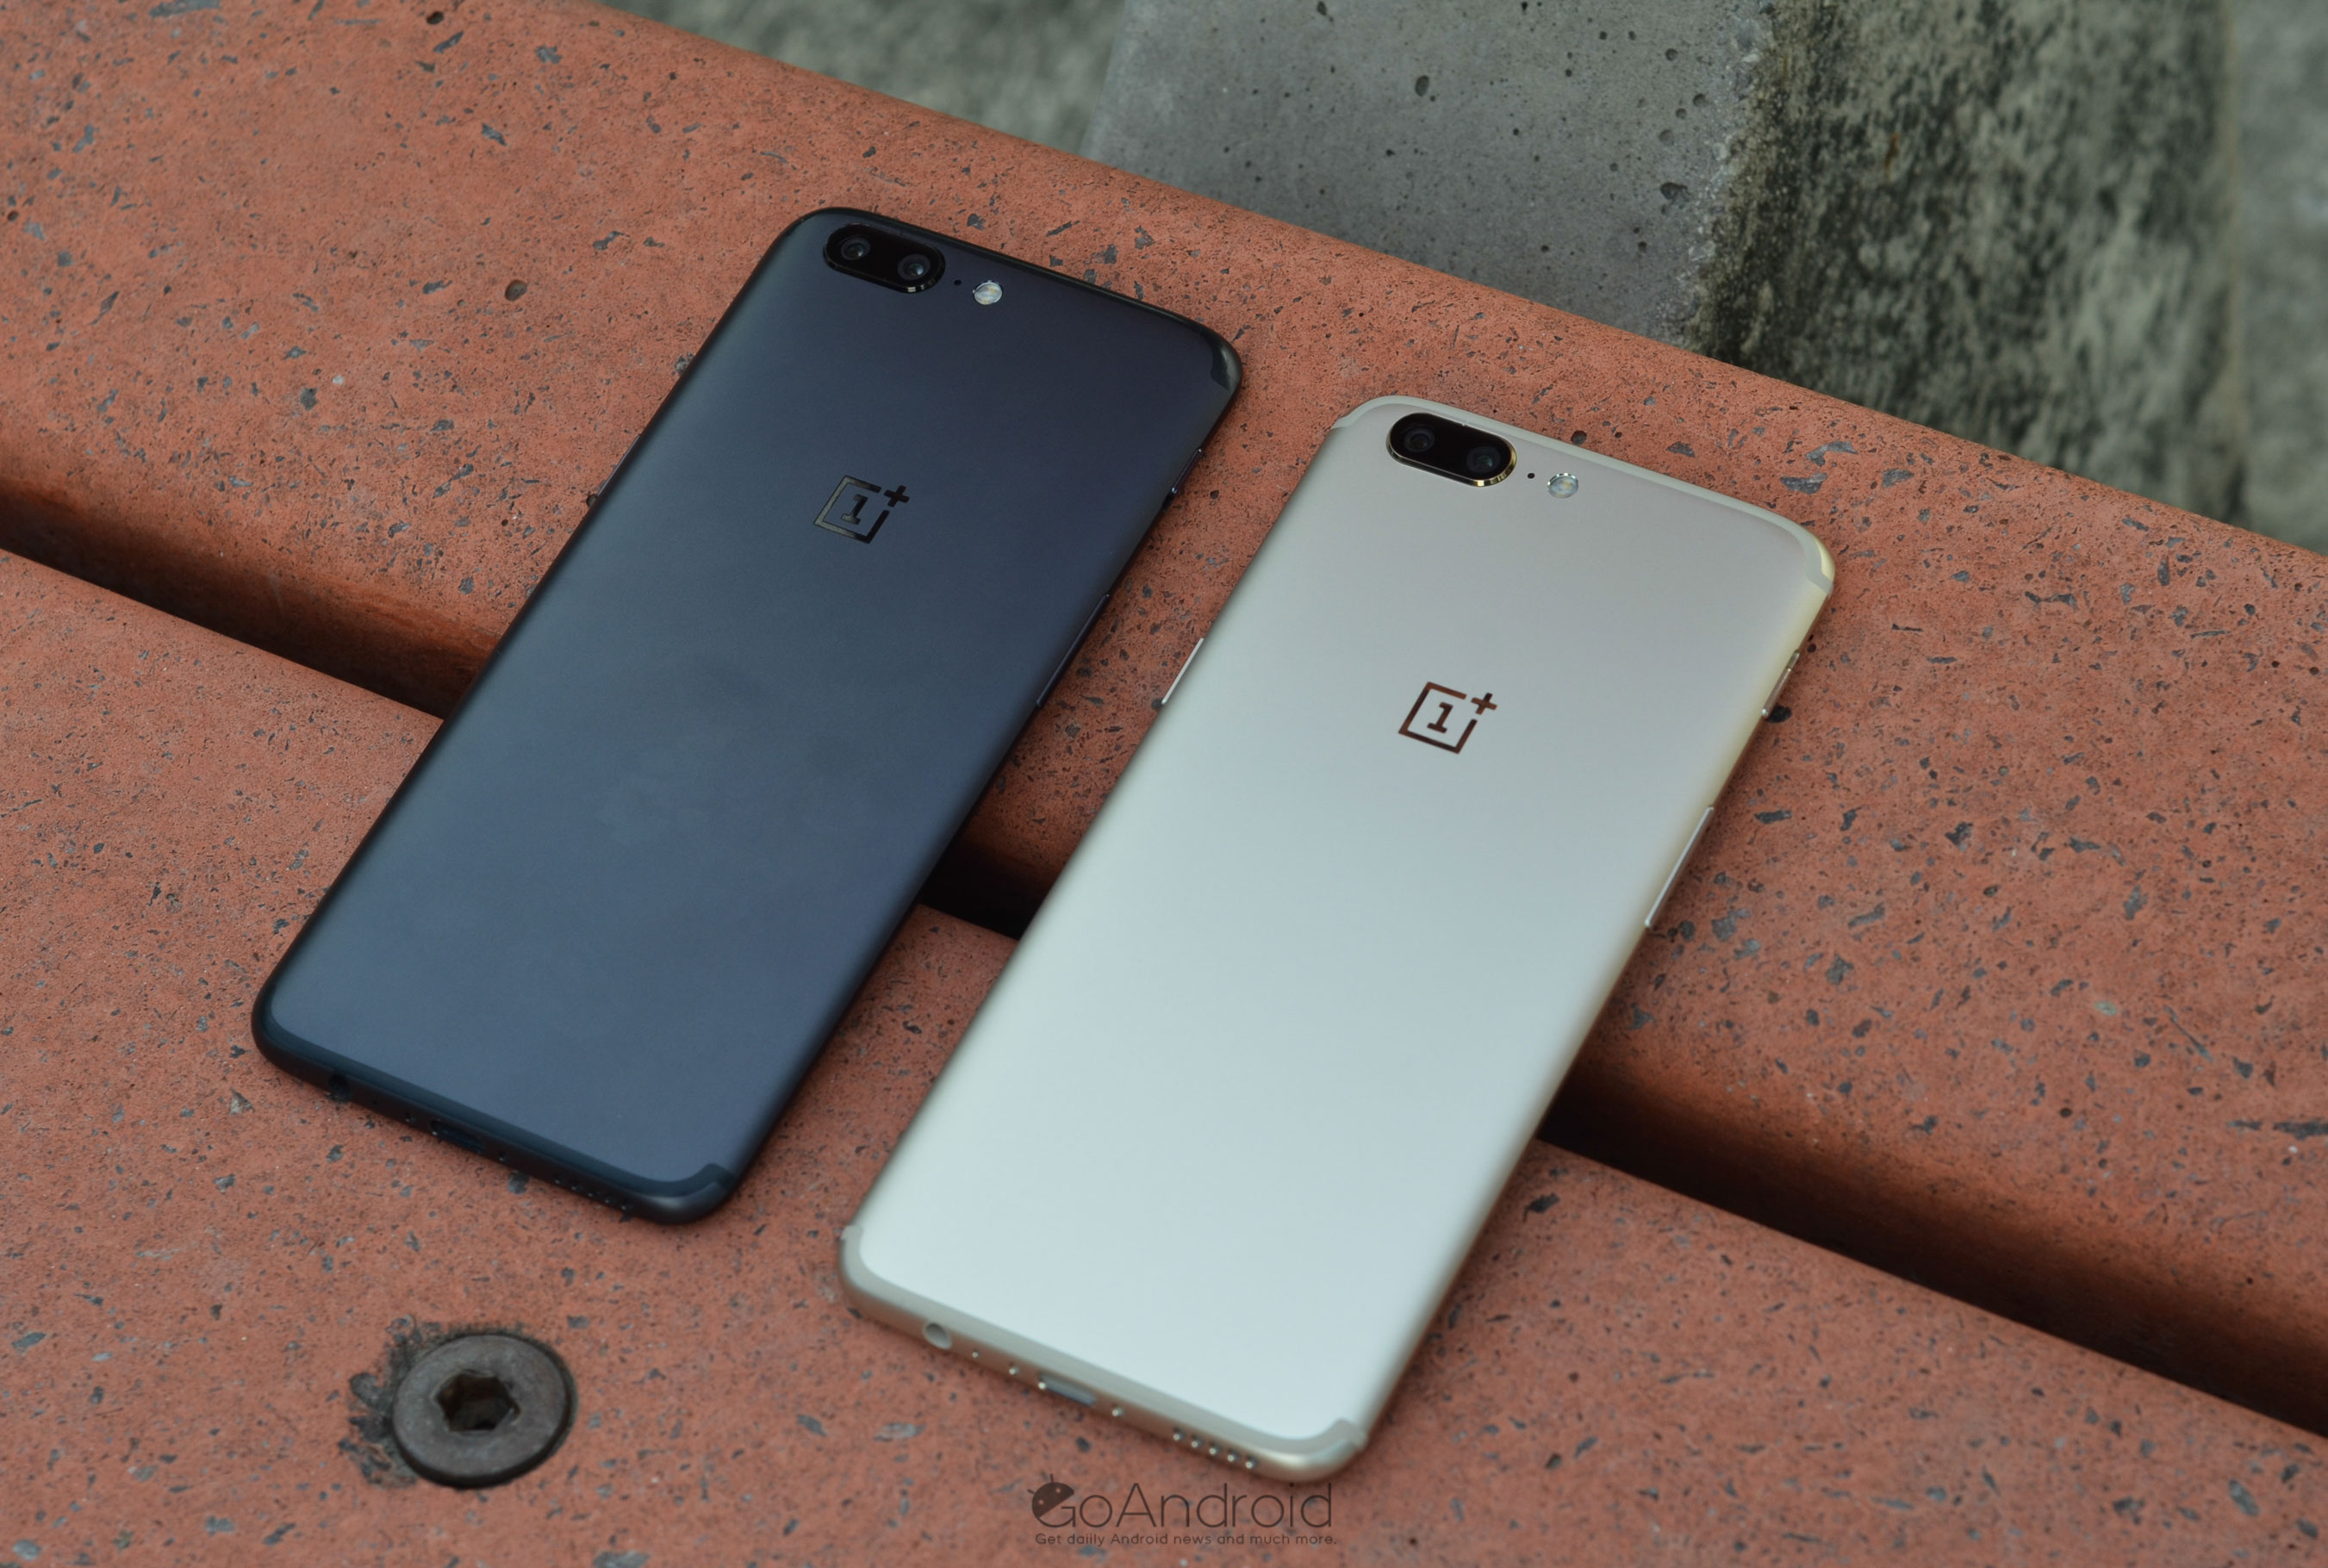 oneplus 5 soft gold and oneplus 5 slate grey comaprison